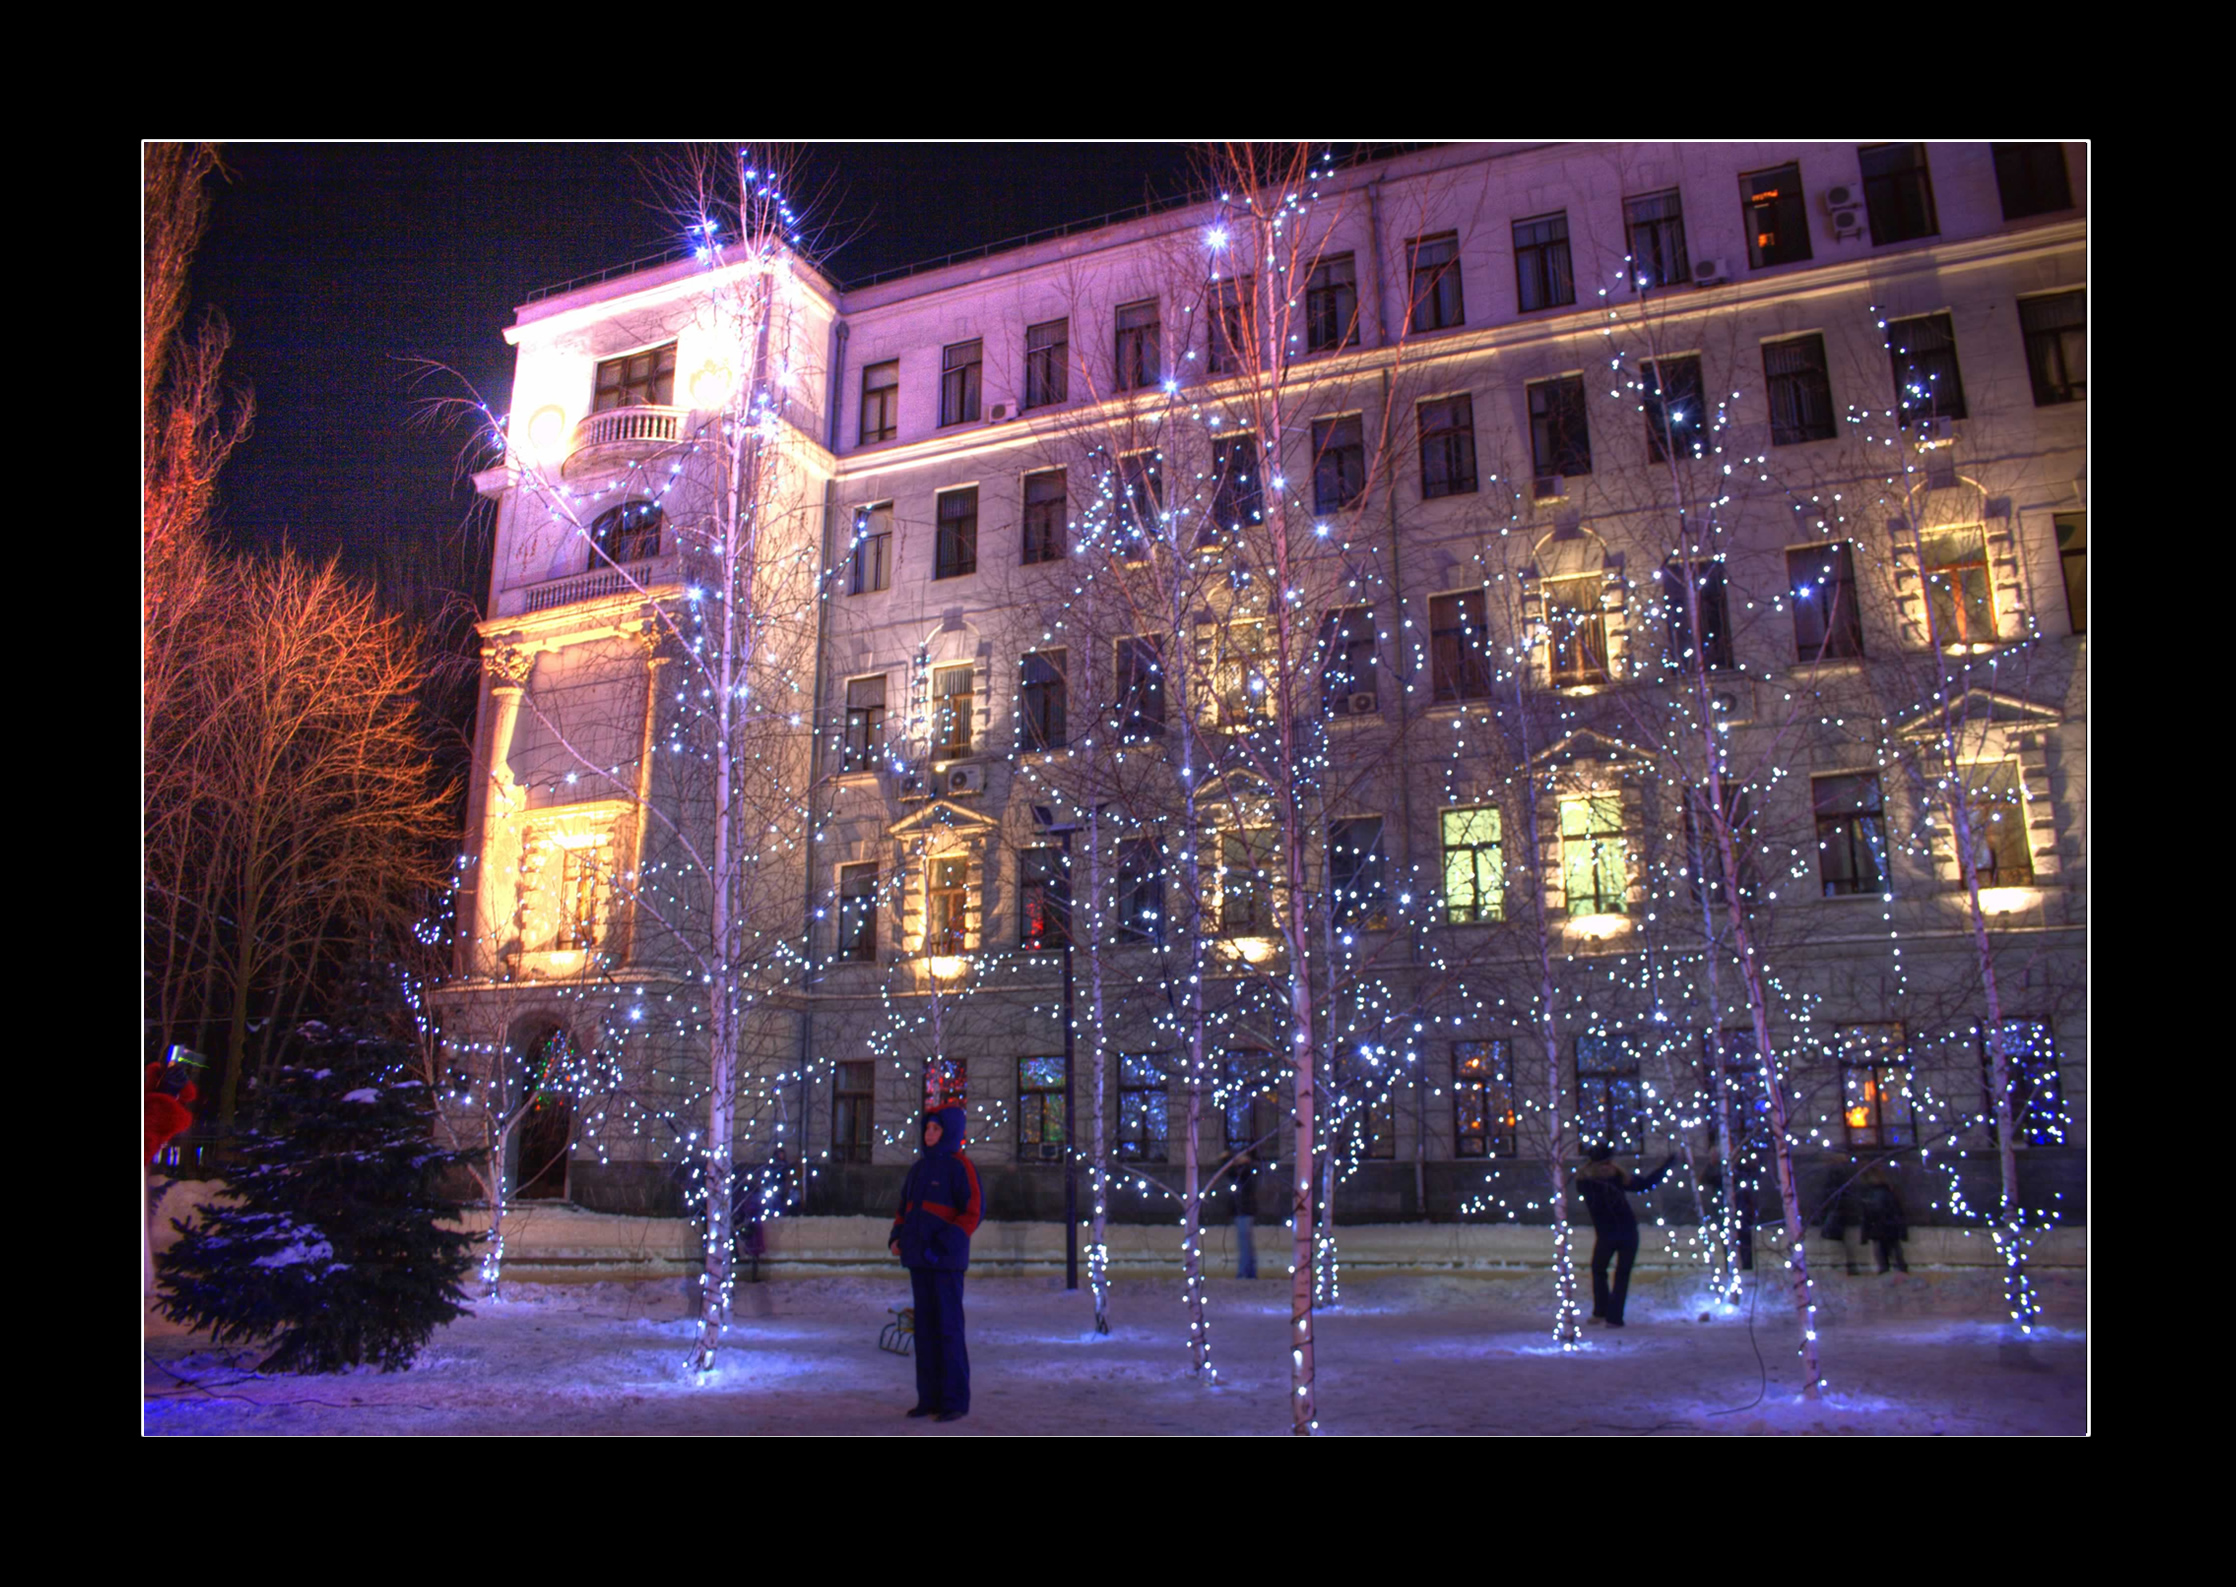 Dnipropetrovsk Ucraina HDR Luci Neve Palazzo in inverno con luci